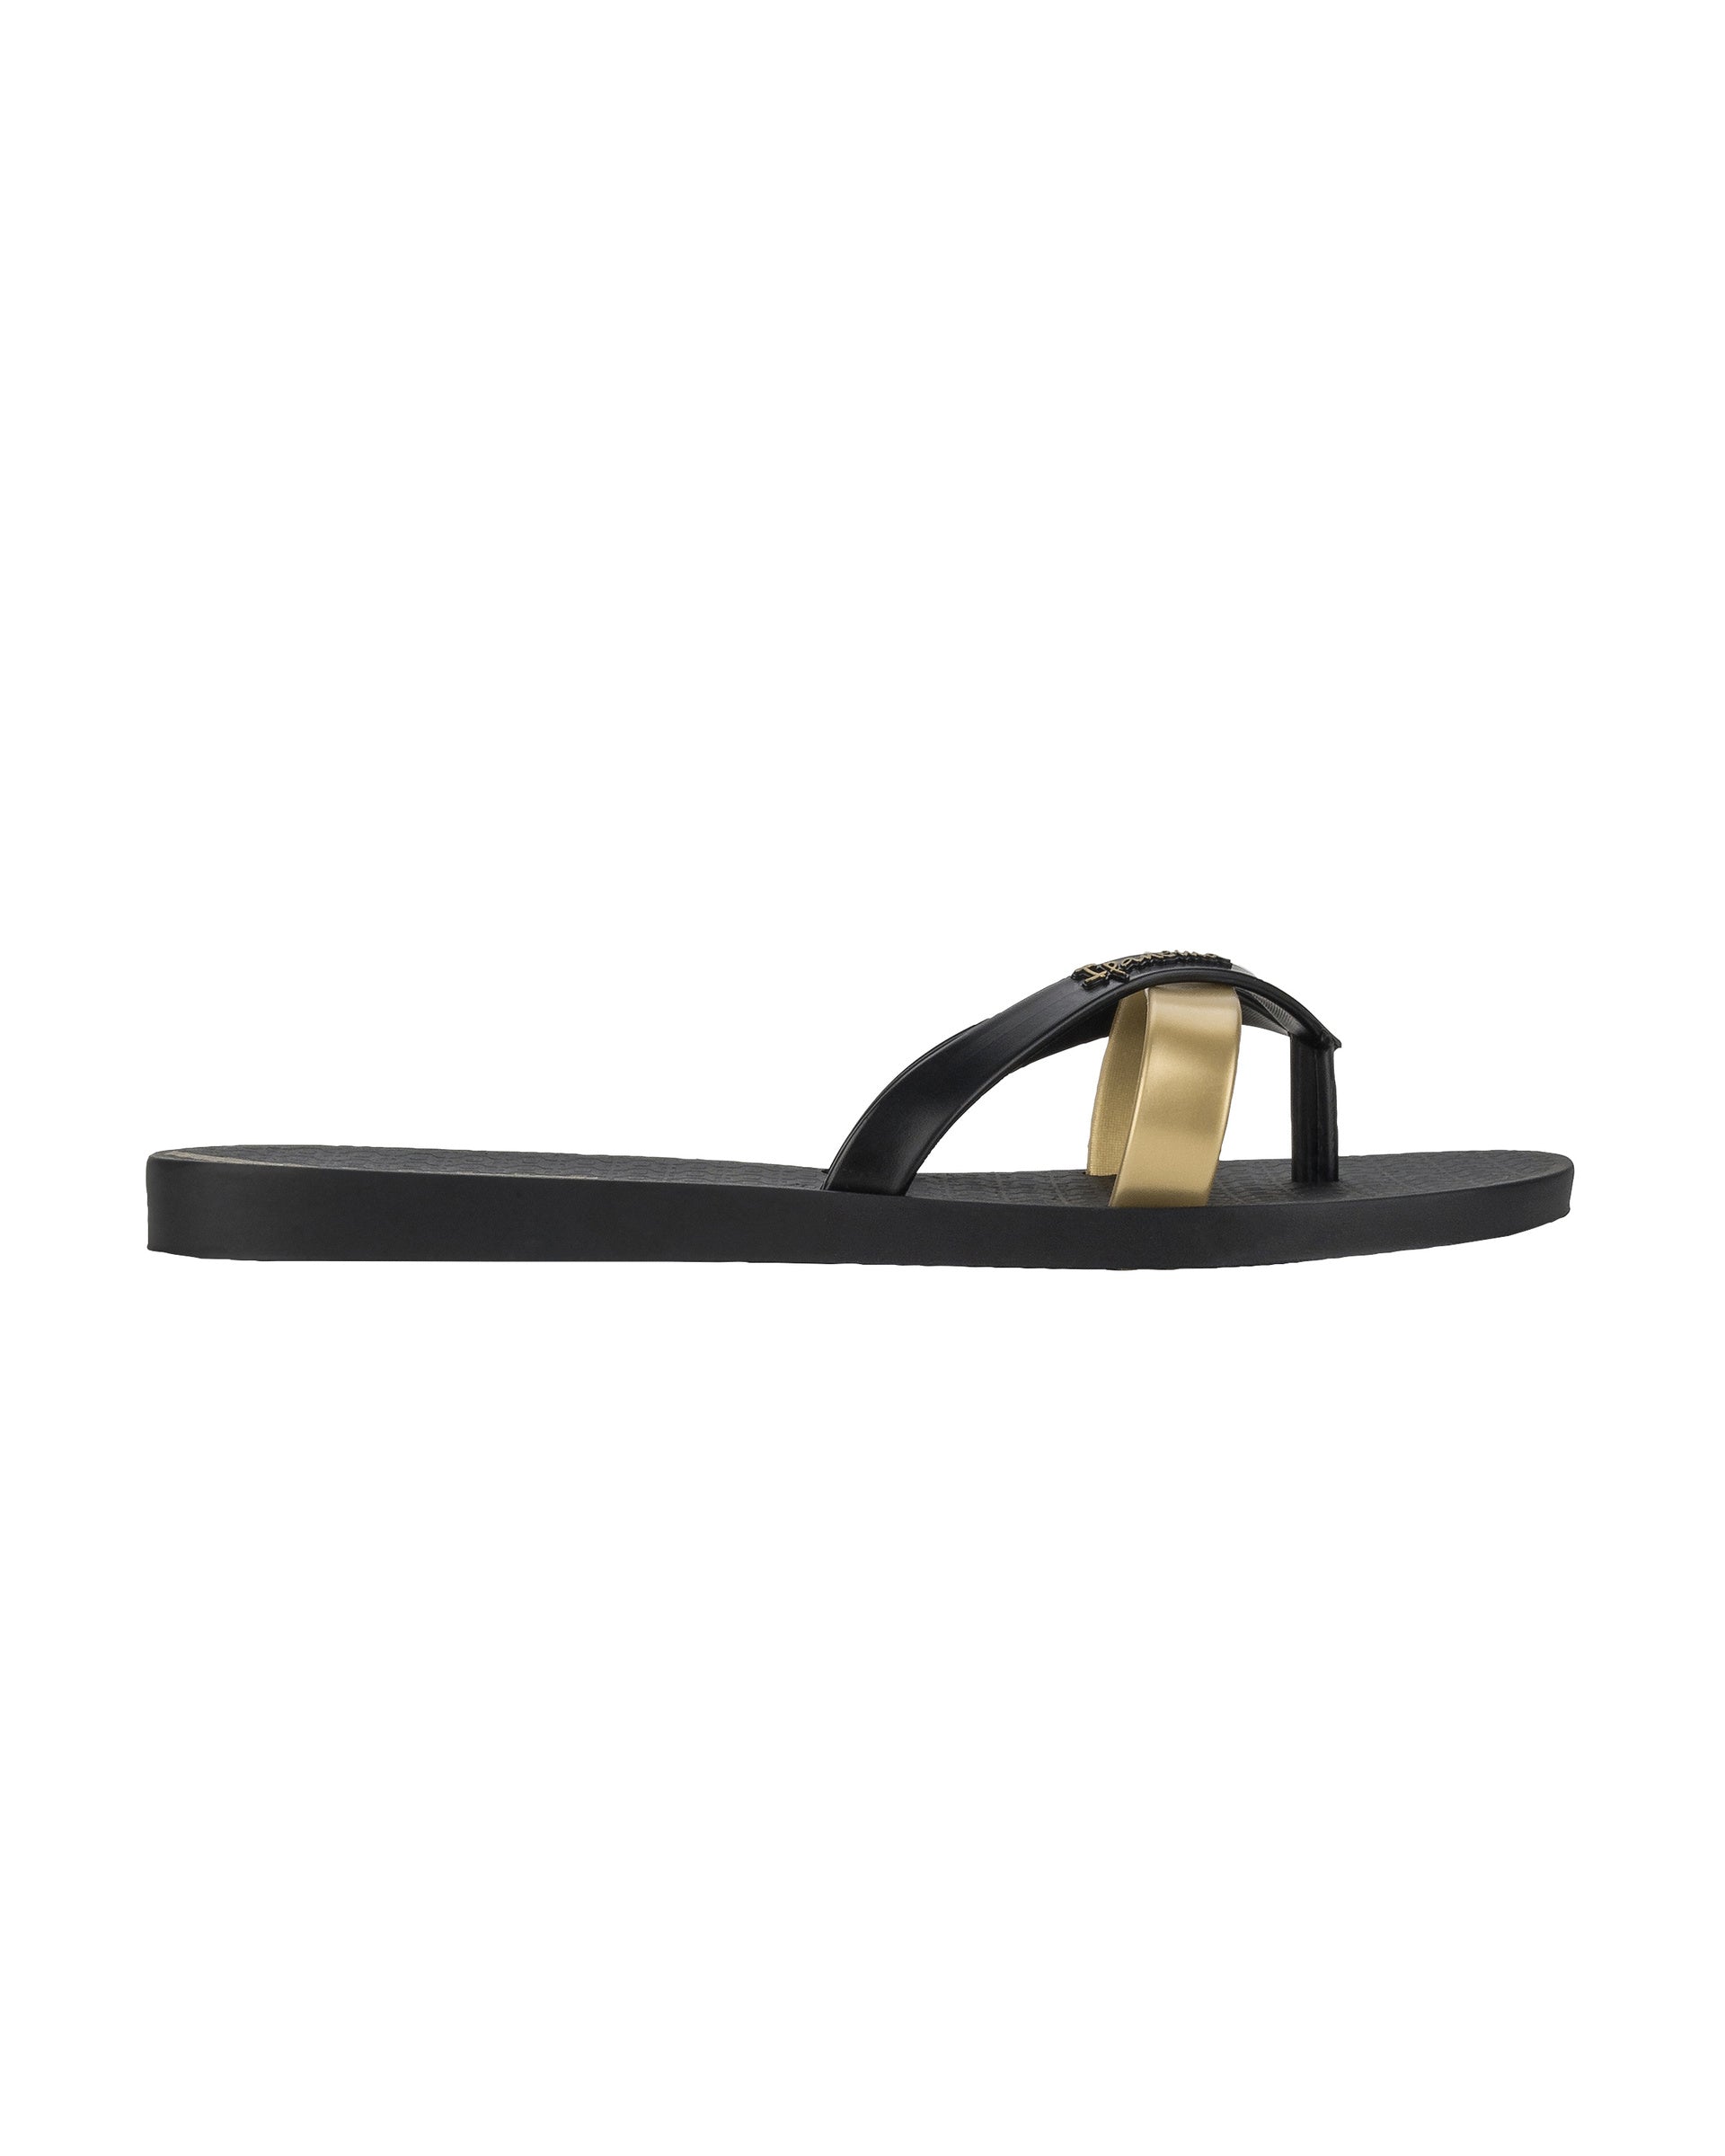 Side view of a black and gold Ipanema Kirei women's flip flop.